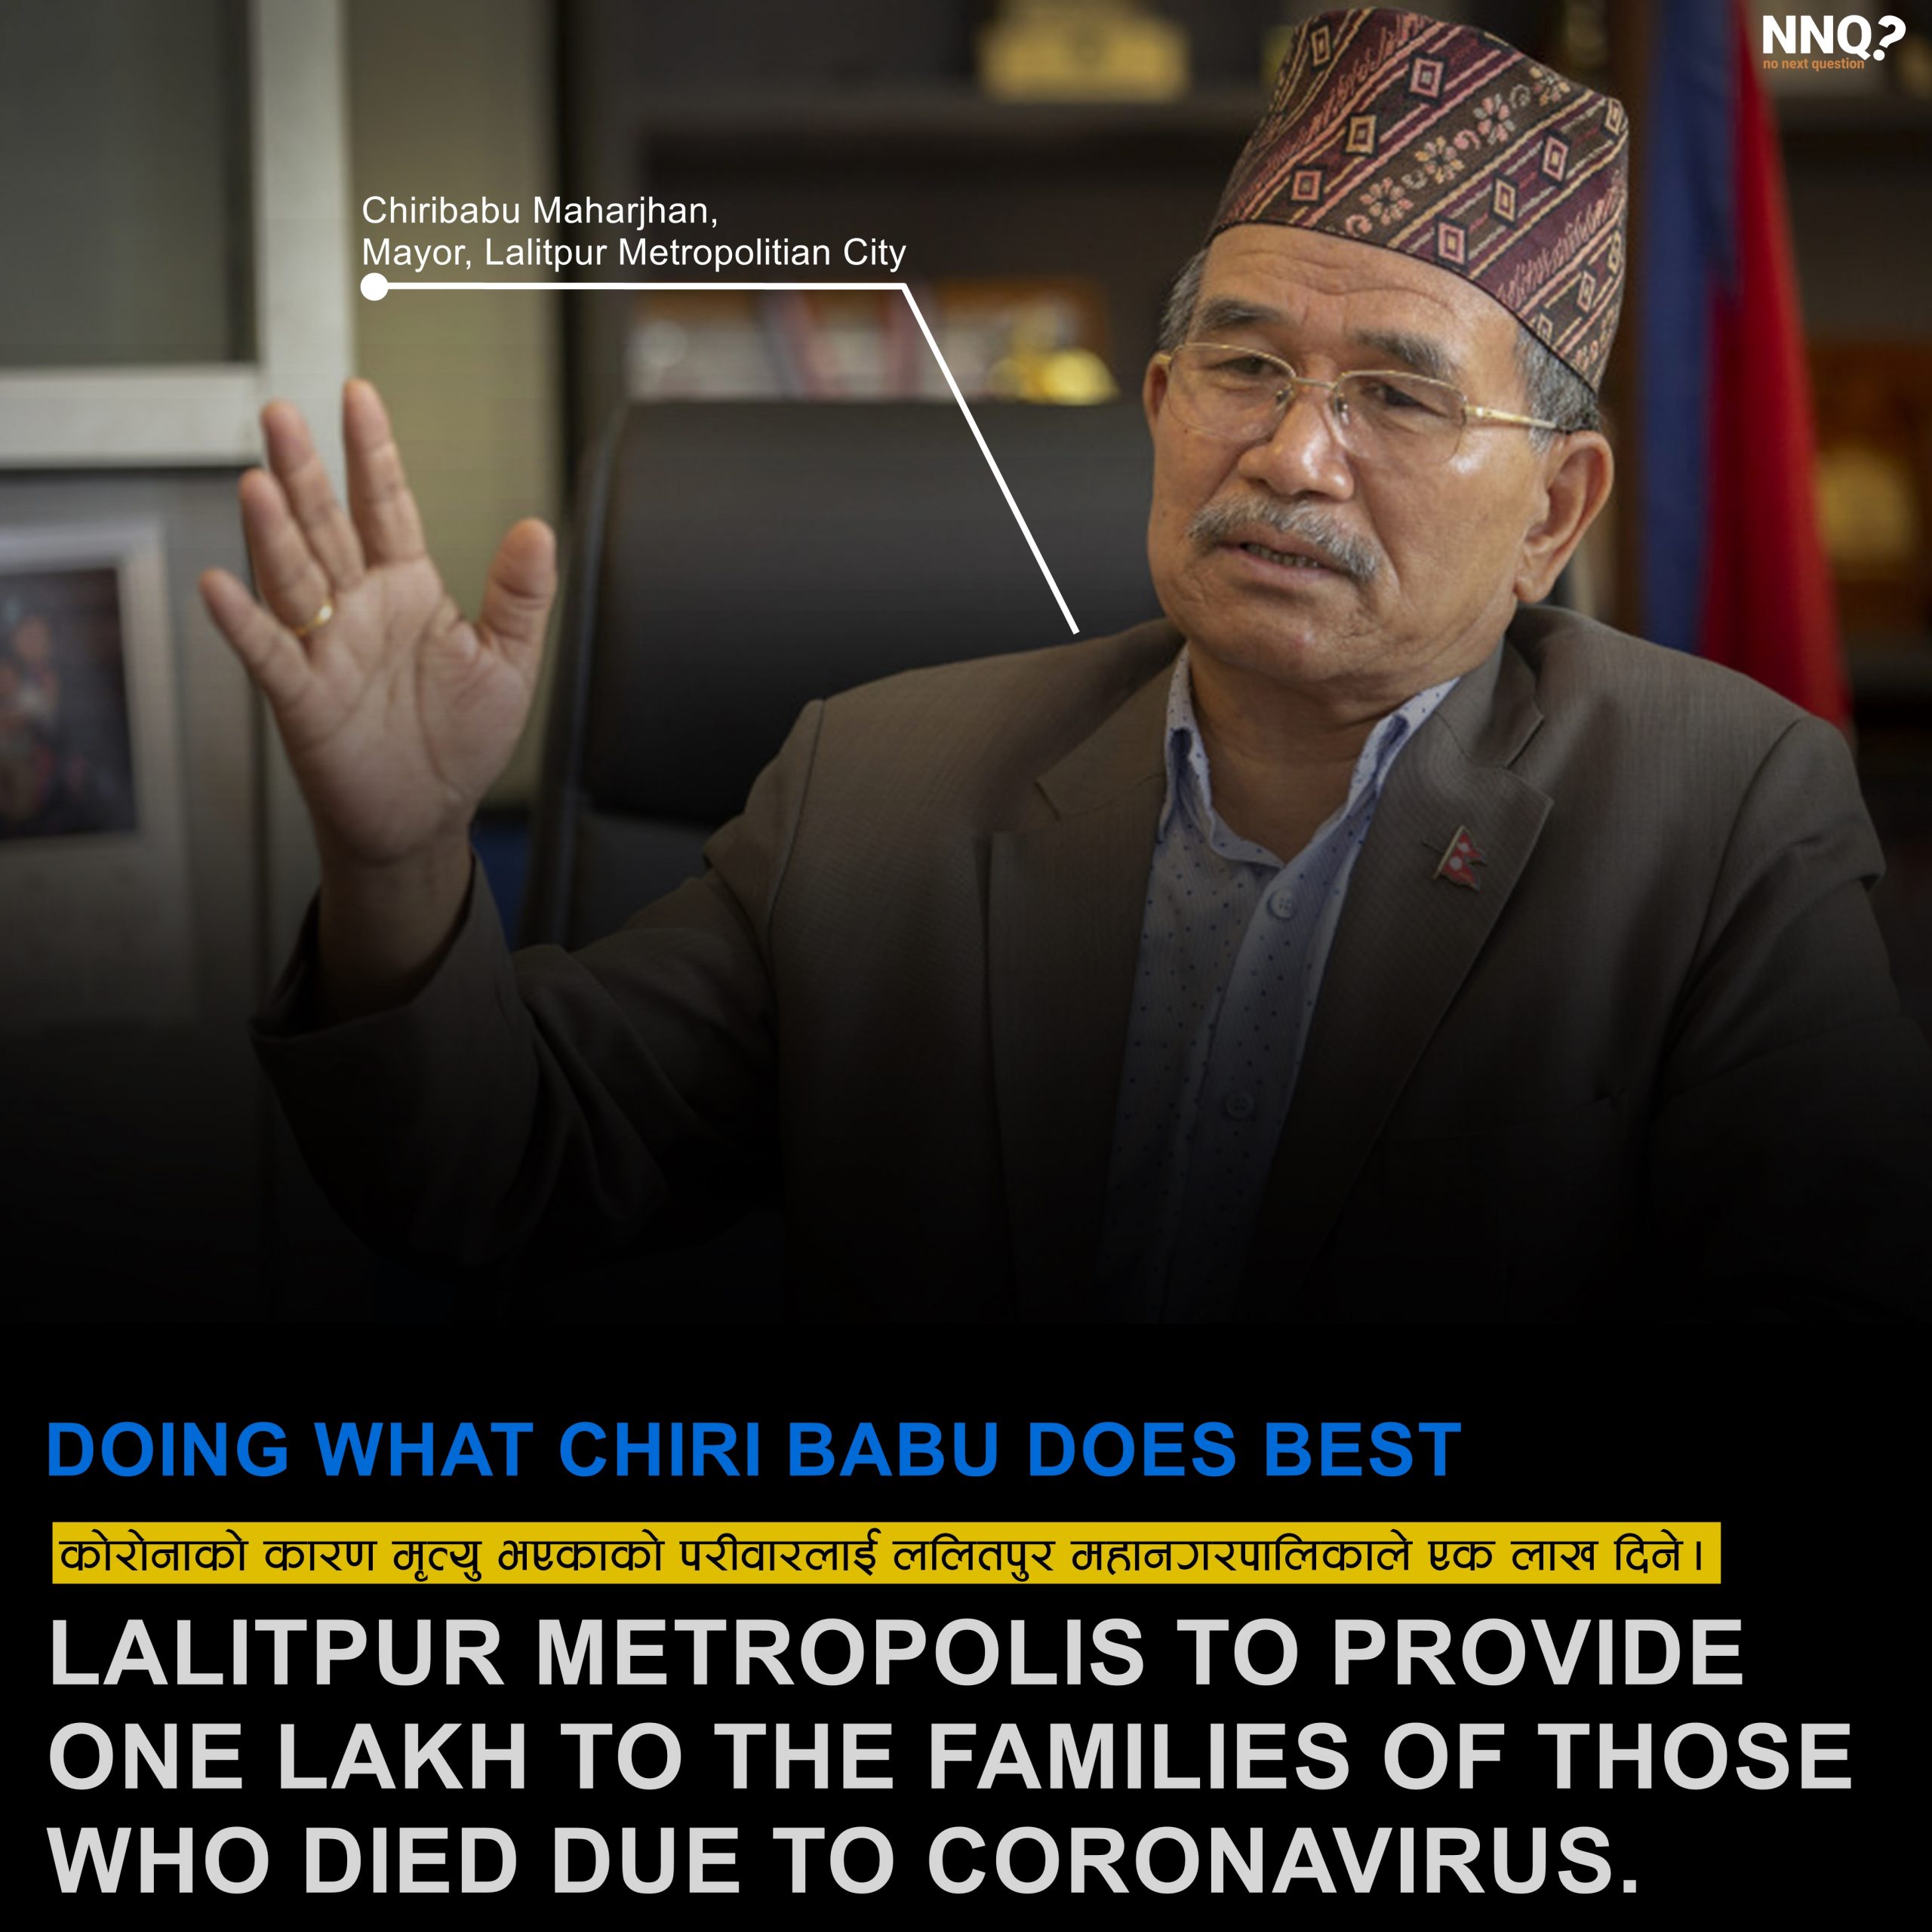 Lalitpur Metropolis to Provide Rs 1 Lakh to the Families of those who died due to COVID-19